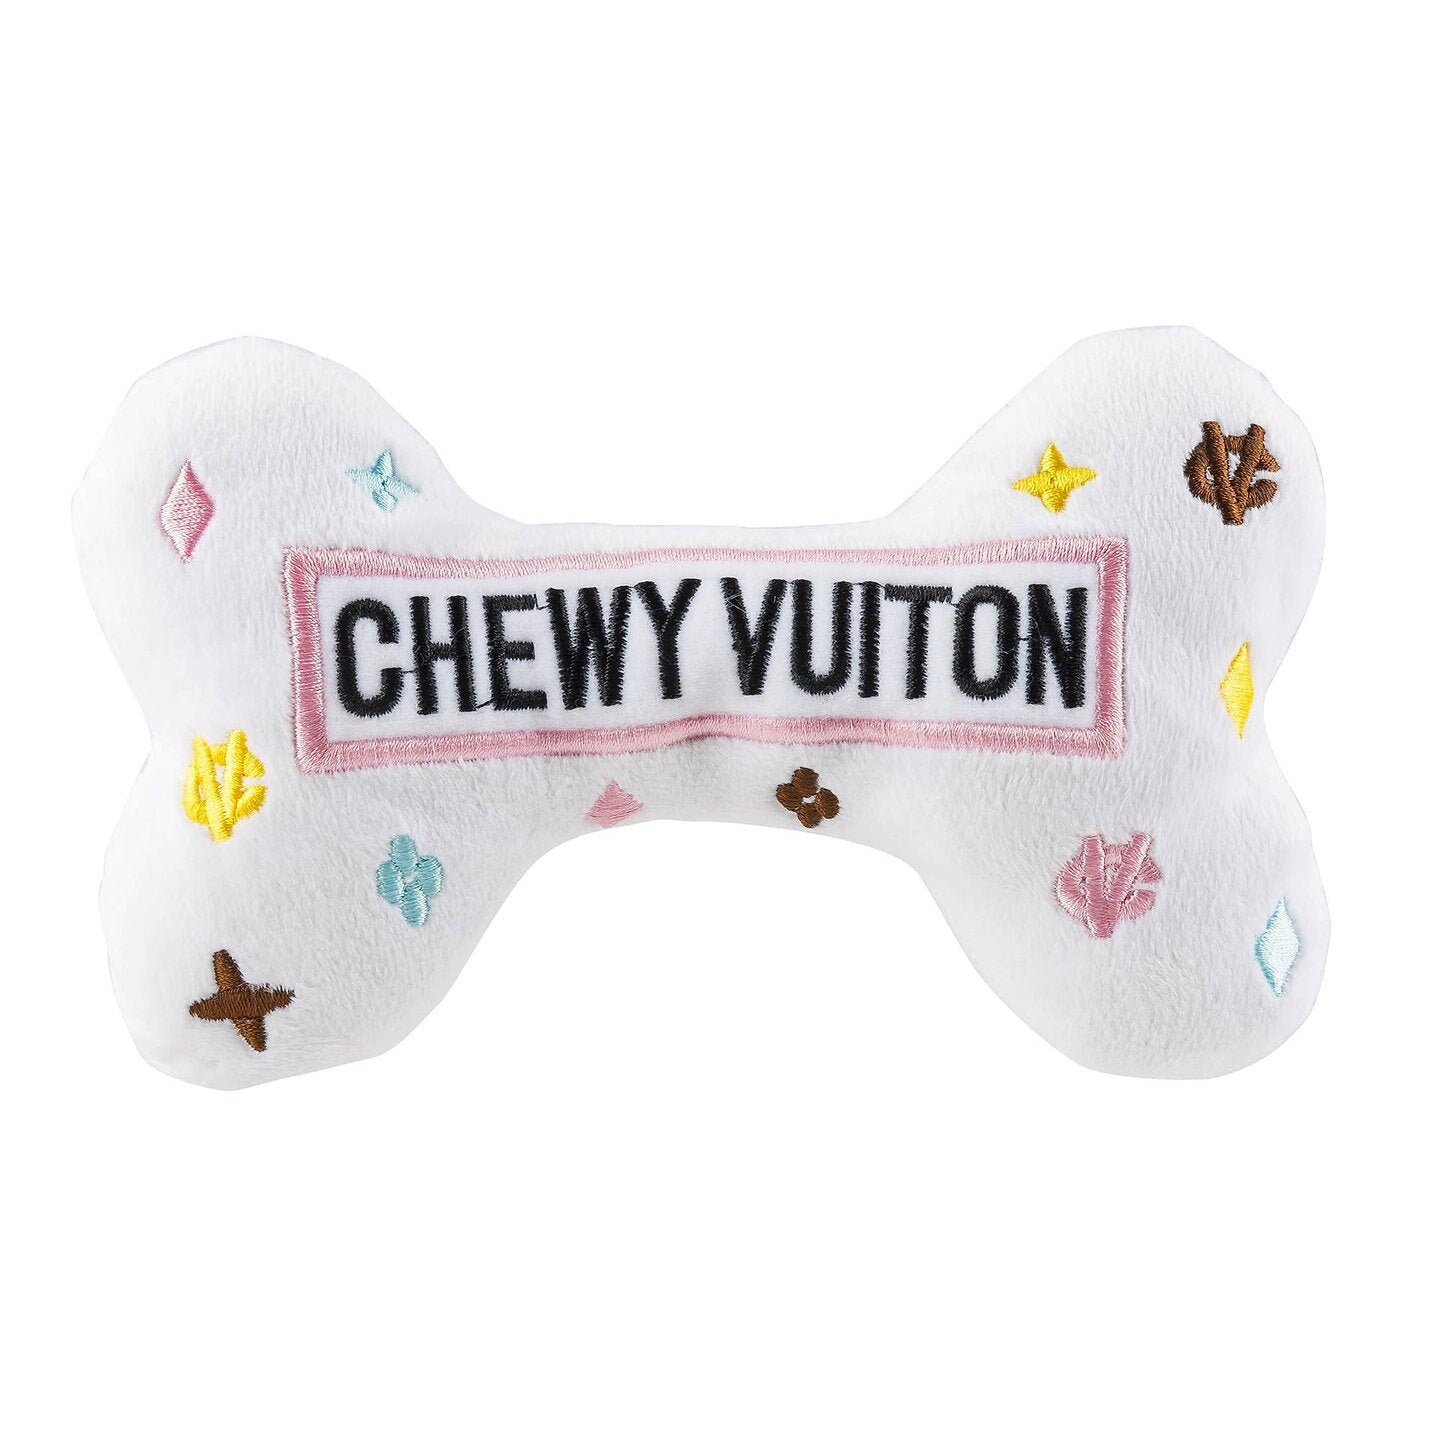 Buy Chewy Vuiton Online In India -  India